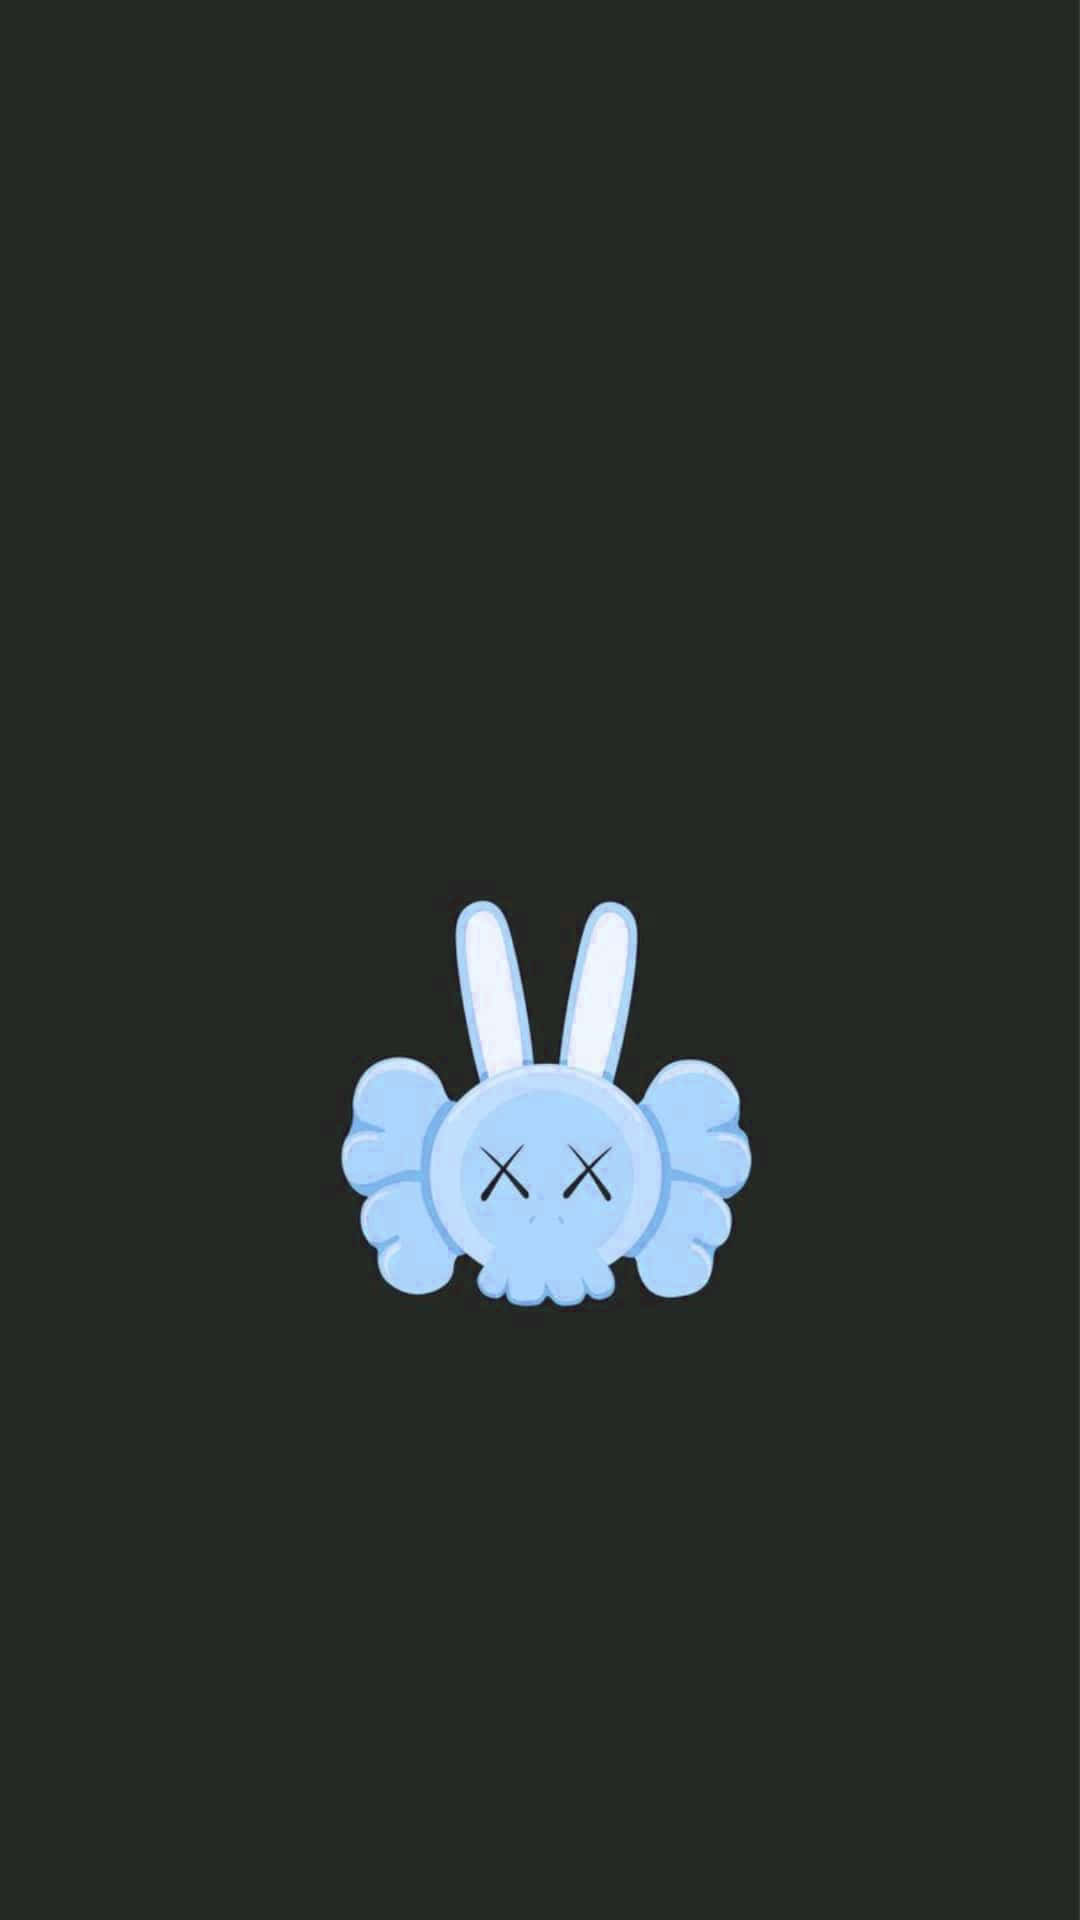 A Blue Bunny With Wings On A Black Background Wallpaper